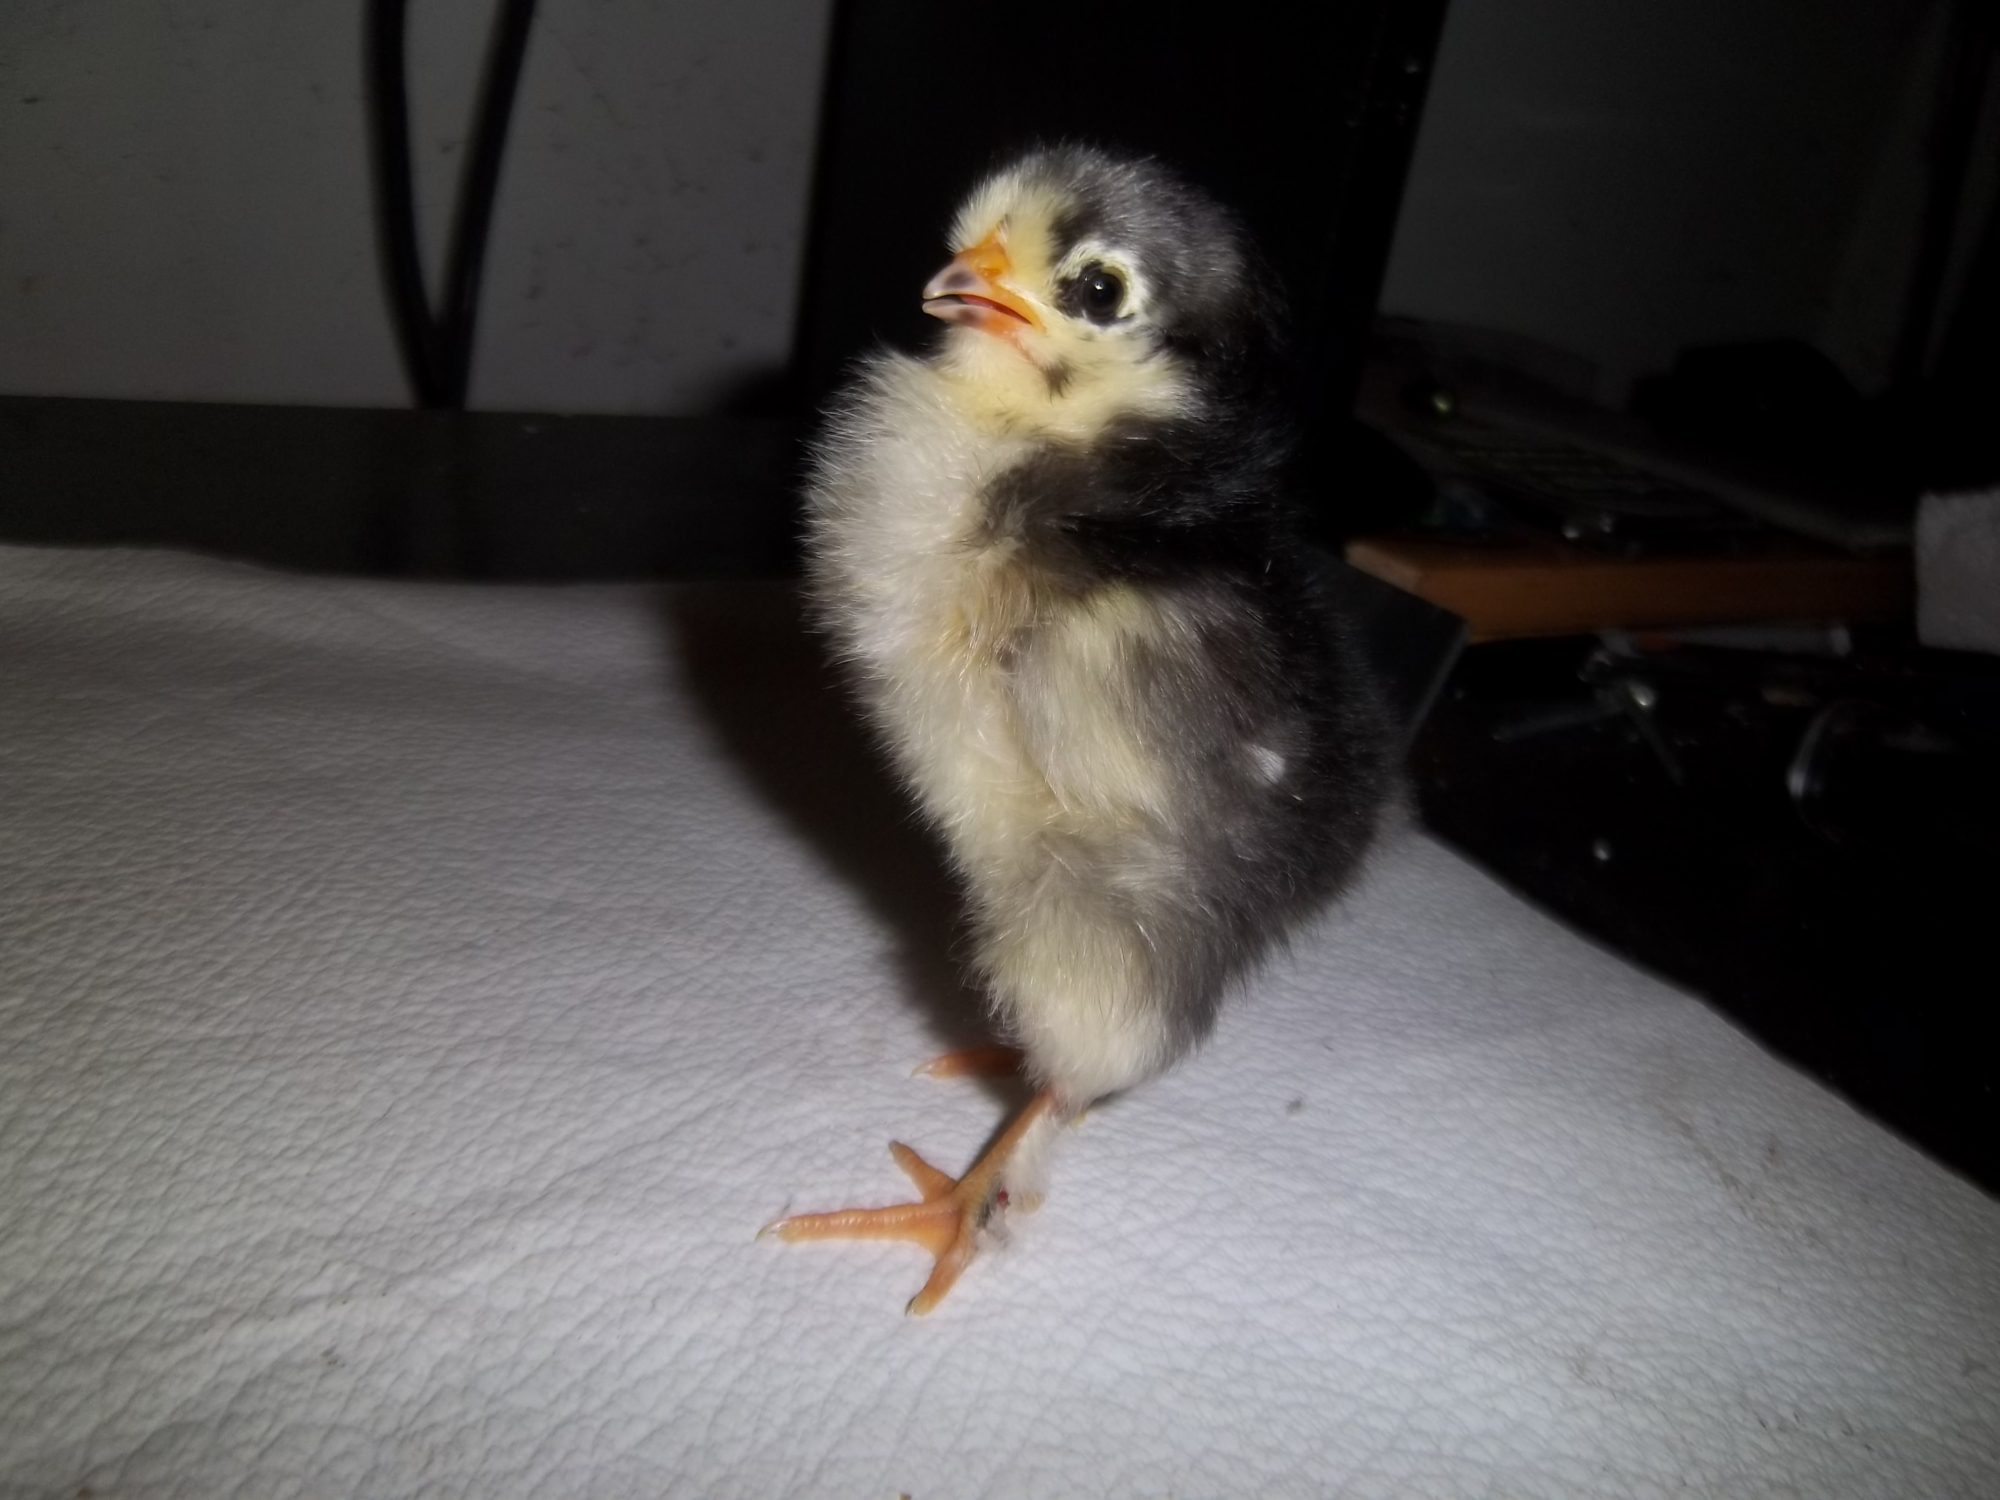 one of the new babies, startled by the flash